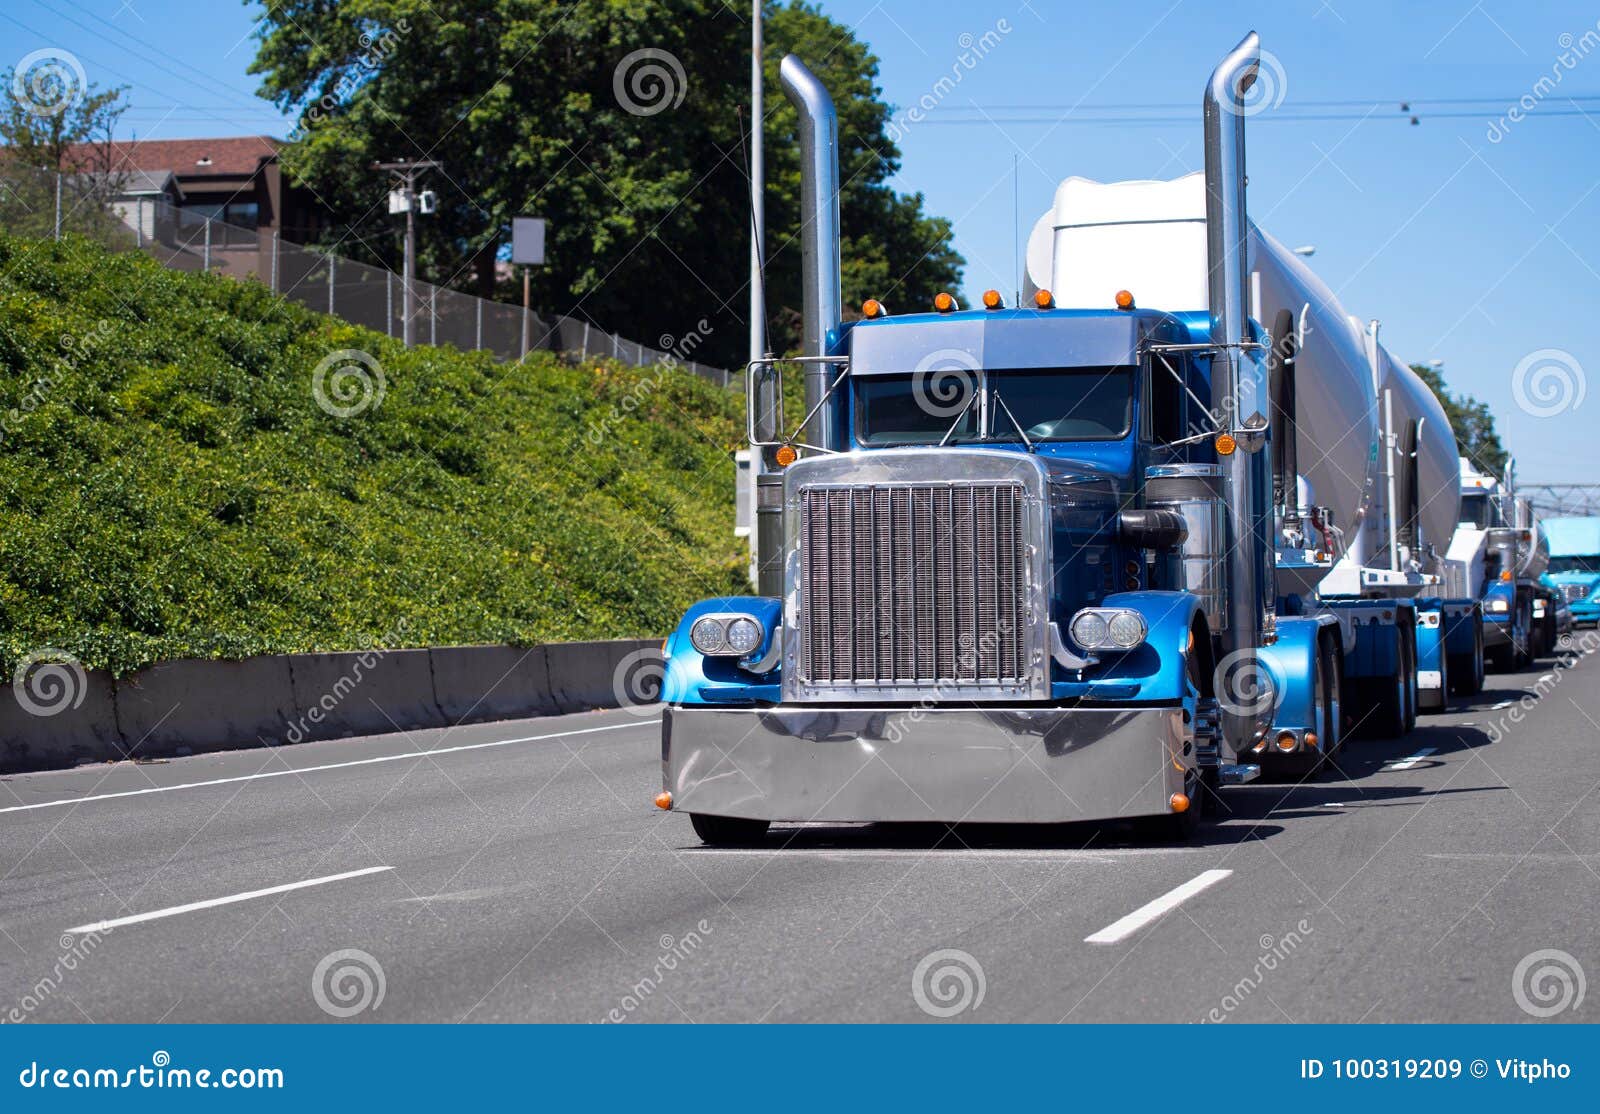 convoy of big rigs semi trucks on the road with blue classic american bonnet semi tractor with bulk trailer